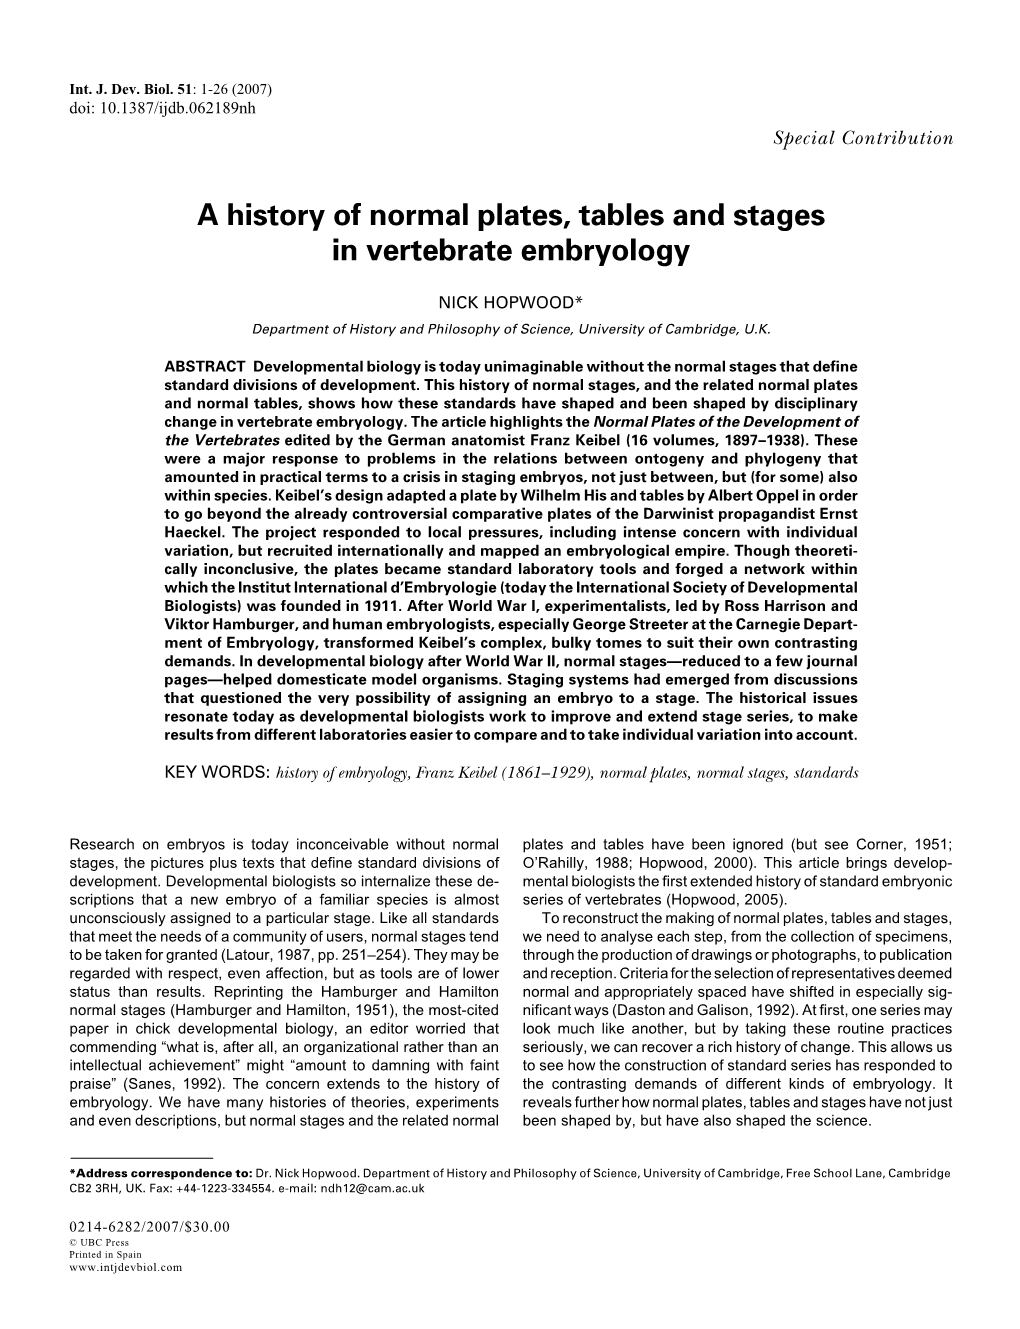 A History of Normal Plates, Tables and Stages in Vertebrate Embryology